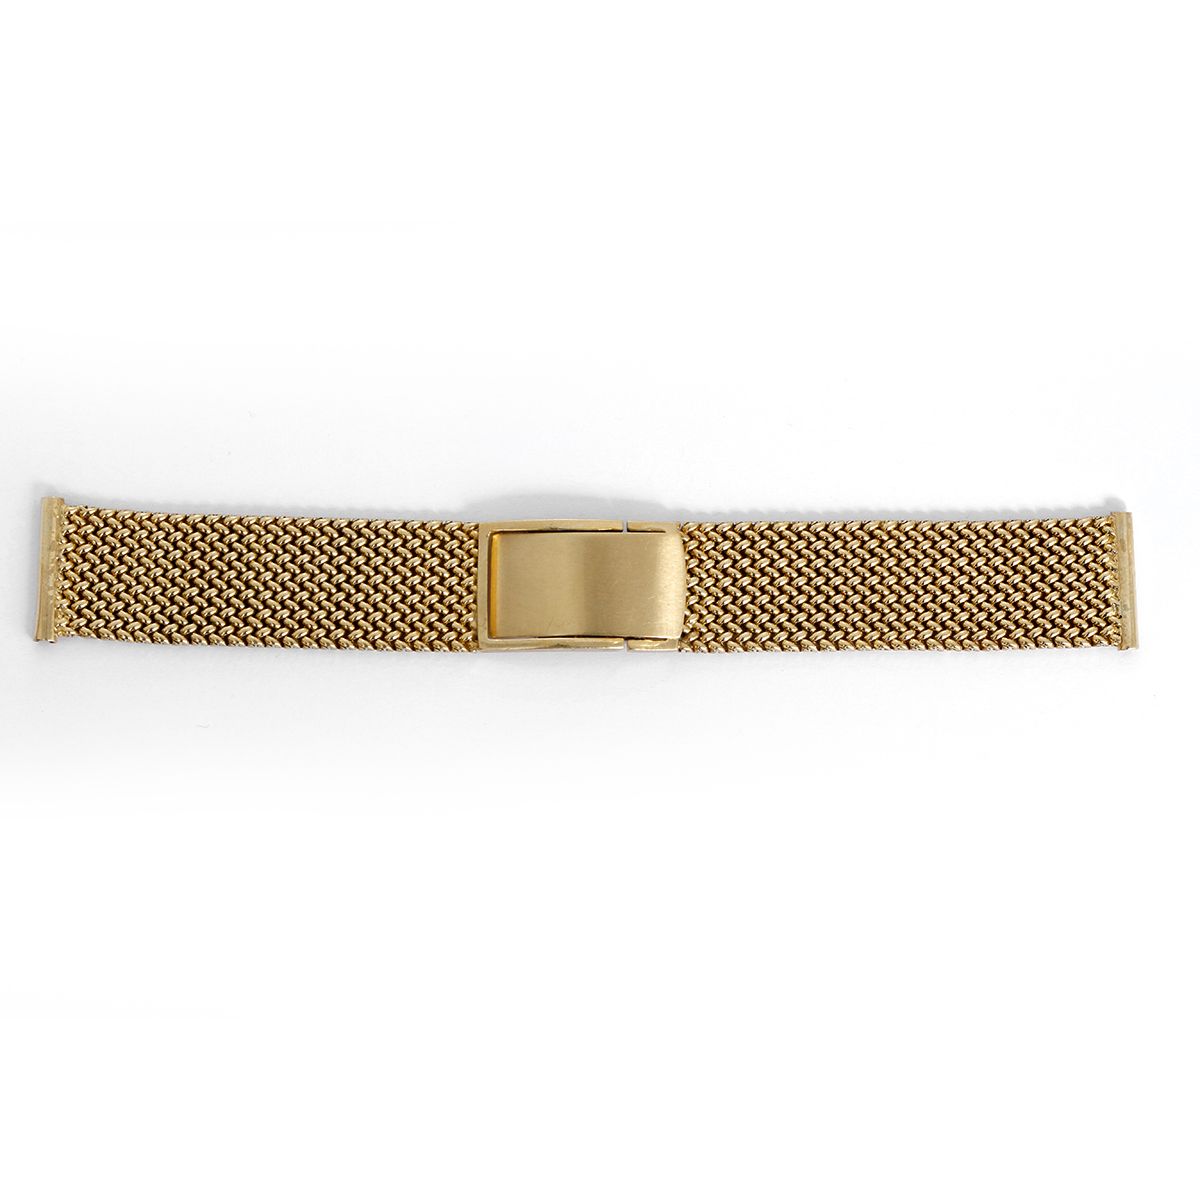 OMEGA  A YELLOW GOLD BRACELET WATCH CIRCA 1970  Watches Online  Watches   Sothebys